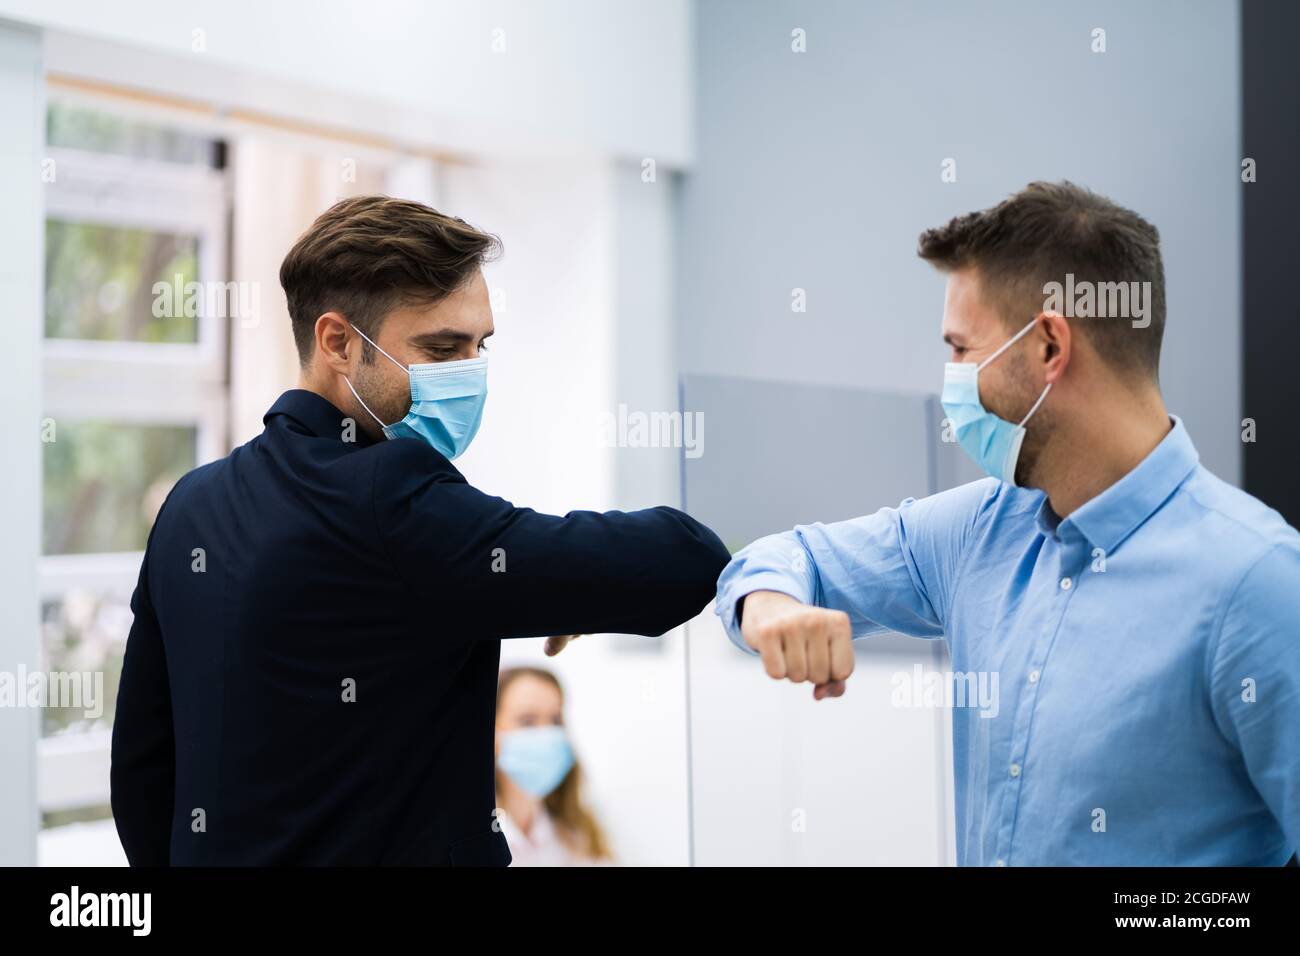 Employees Doing Elbow Bump To Avoid Flu And Stop Covid Spread Stock Photo